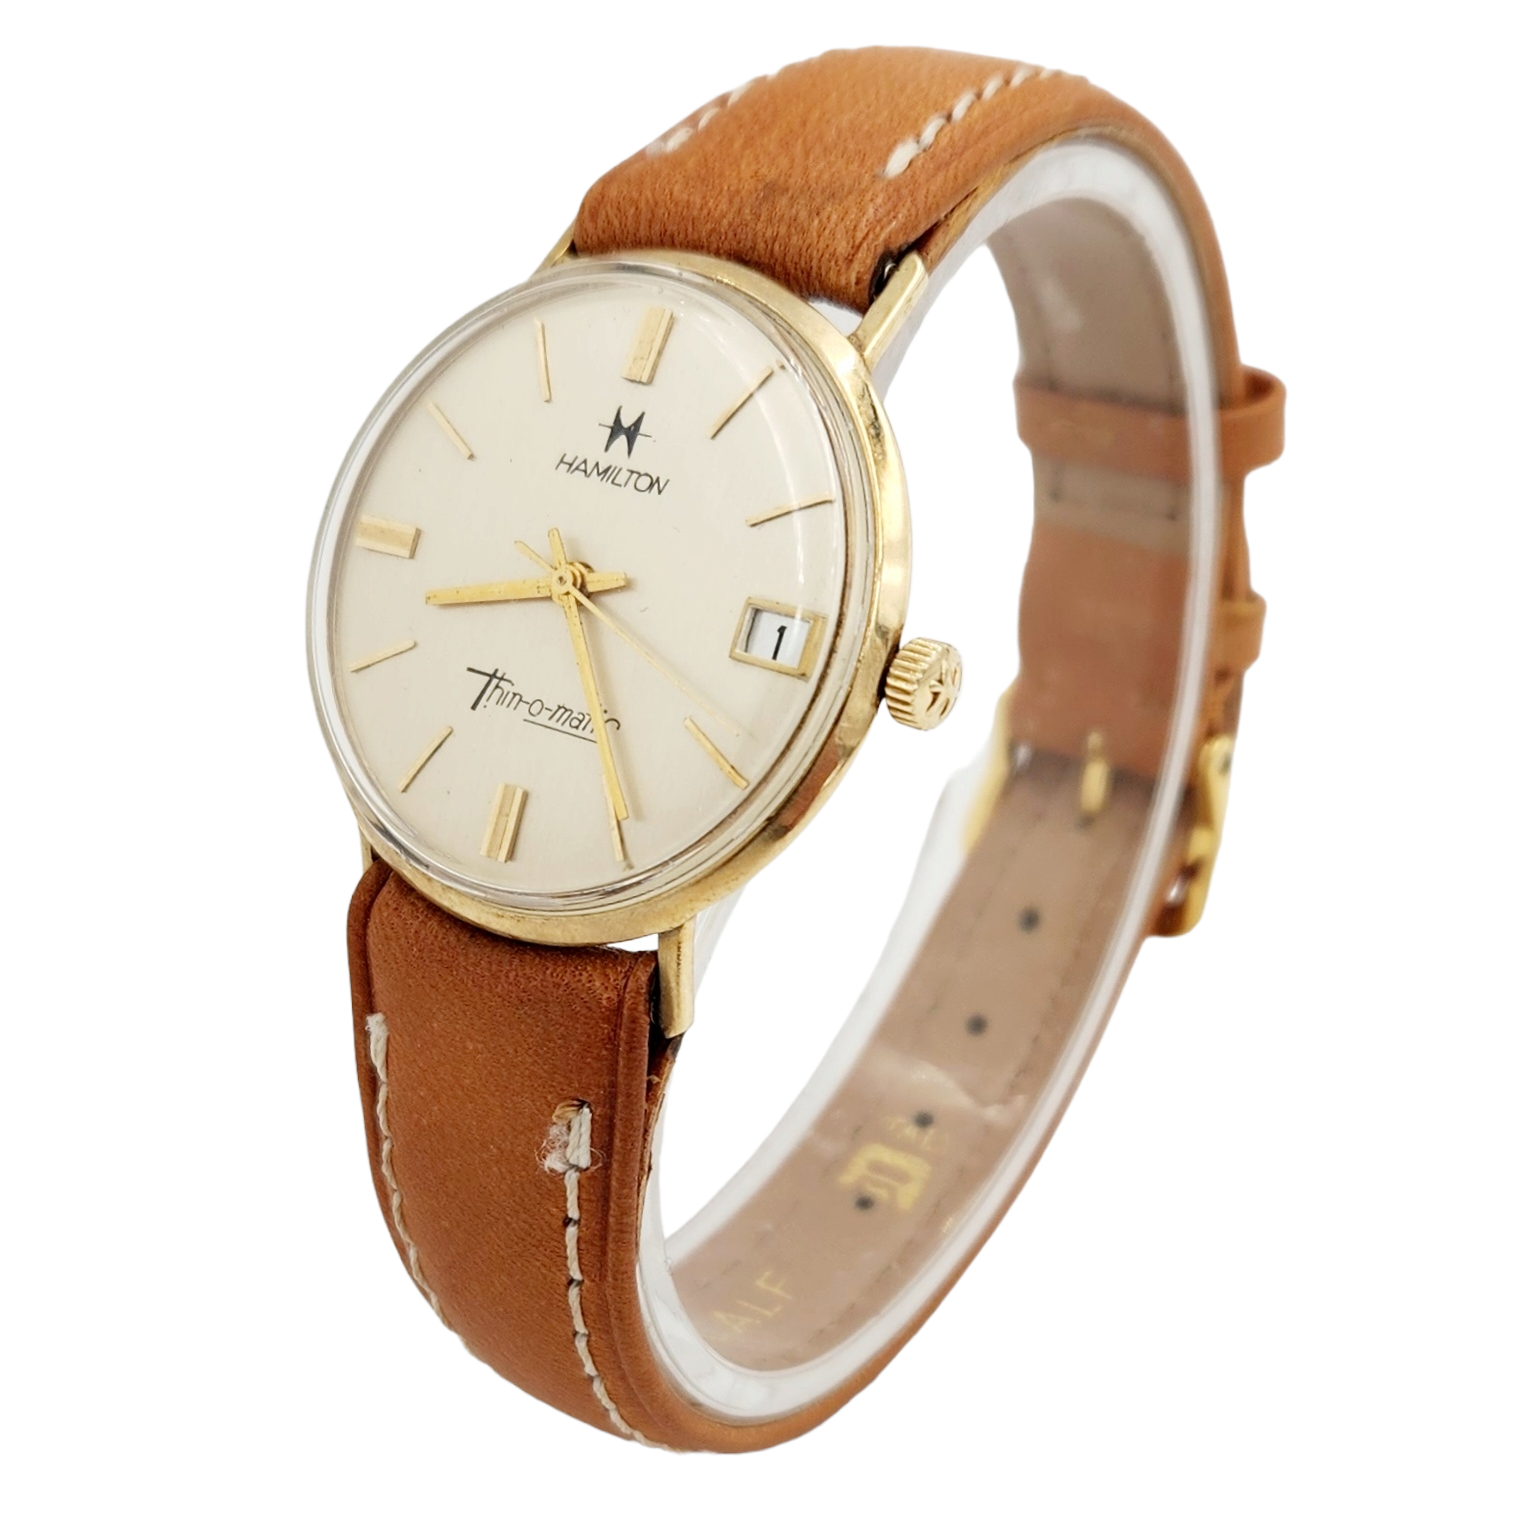 Men's Hamilton Thin-O-Matic 33mm Vintage 10K Yellow Gold Automatic Watch with Brown Leather Strap and Silver Dial. (Pre-Owned)